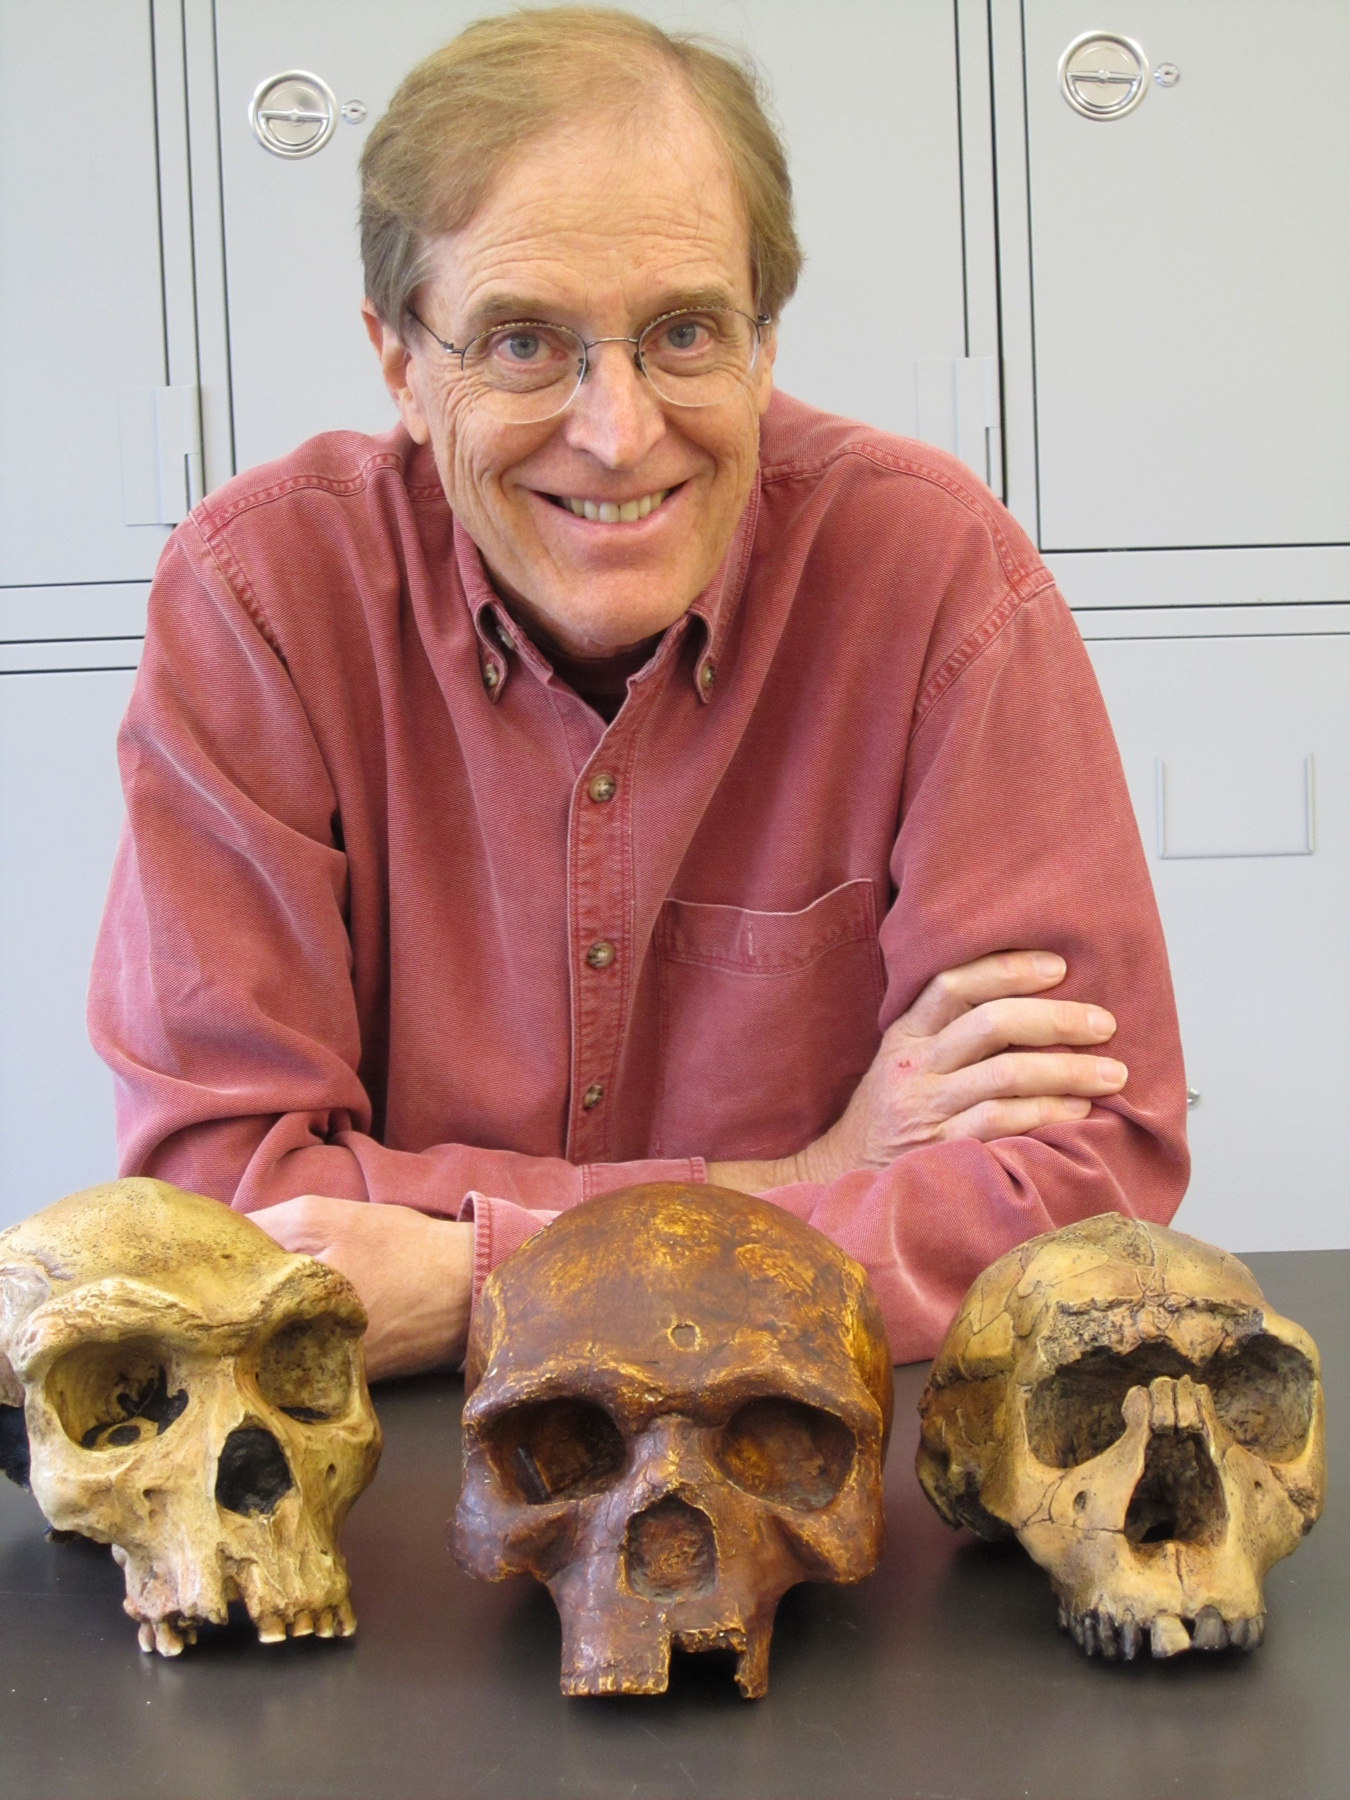 University of Utah anthropologist Alan R. Rogers is the author of a new book, The Evidence for Evolution.